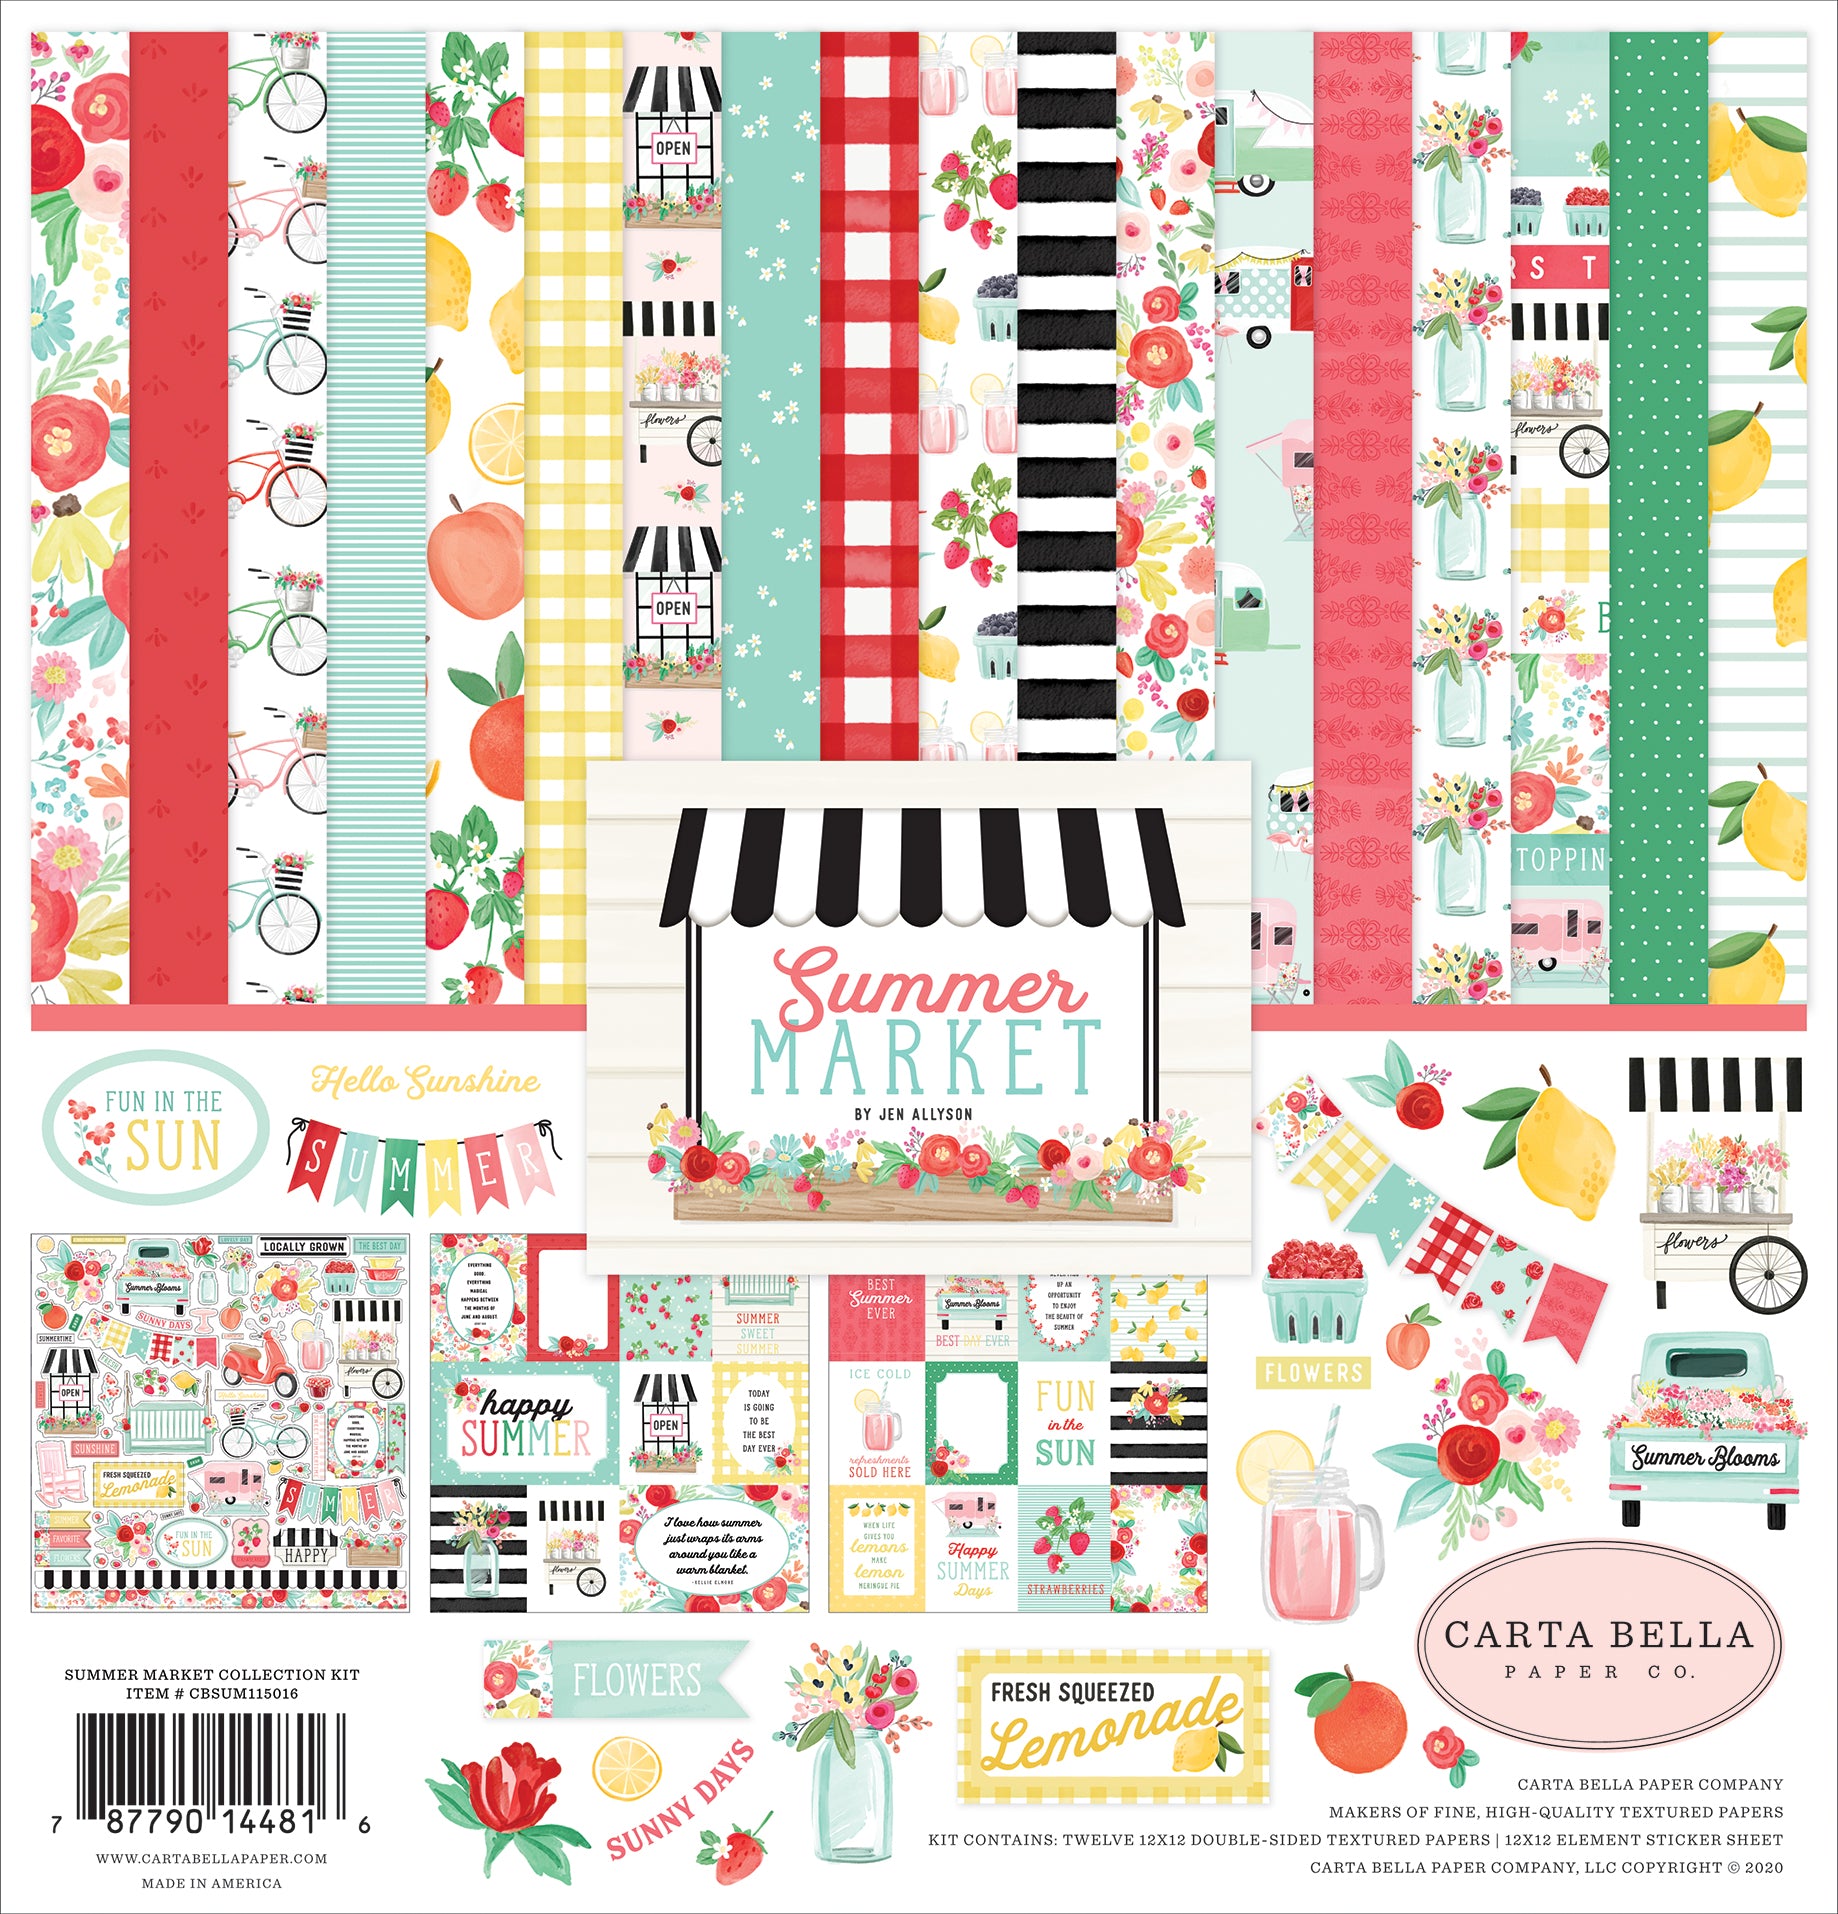 teal pink black red green yellow Carta Bella Paper Company Summer Market Solids Kit paper 